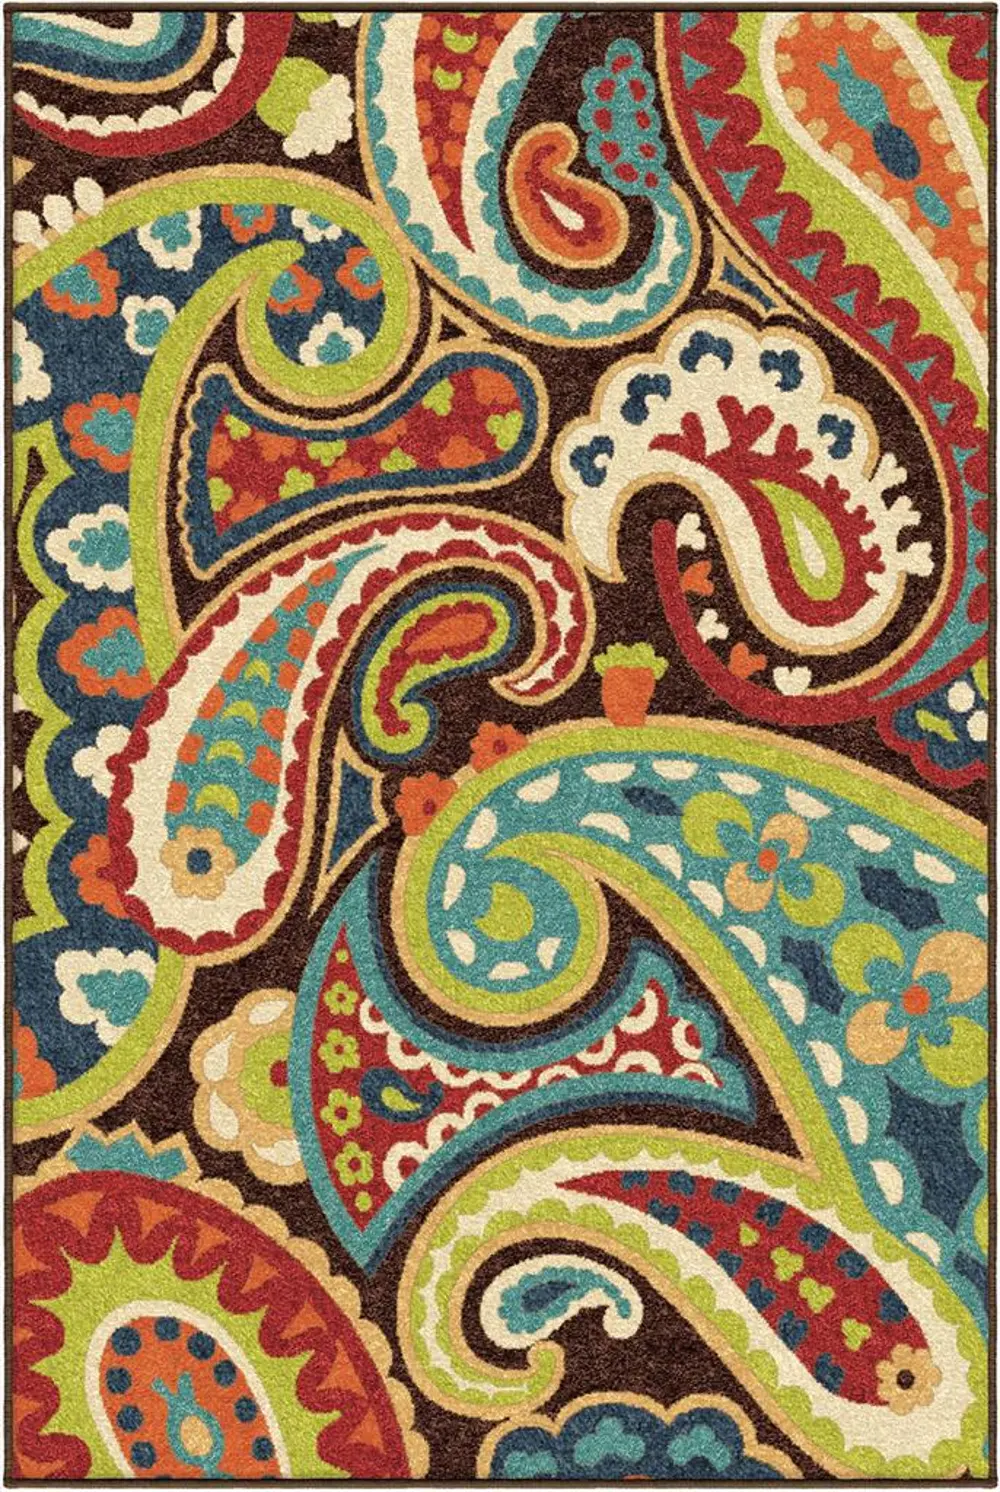 PAISLEY/2305....2 5 x 8 Medium Brown, Turquoise, and Red Area Rug - Paisley-1